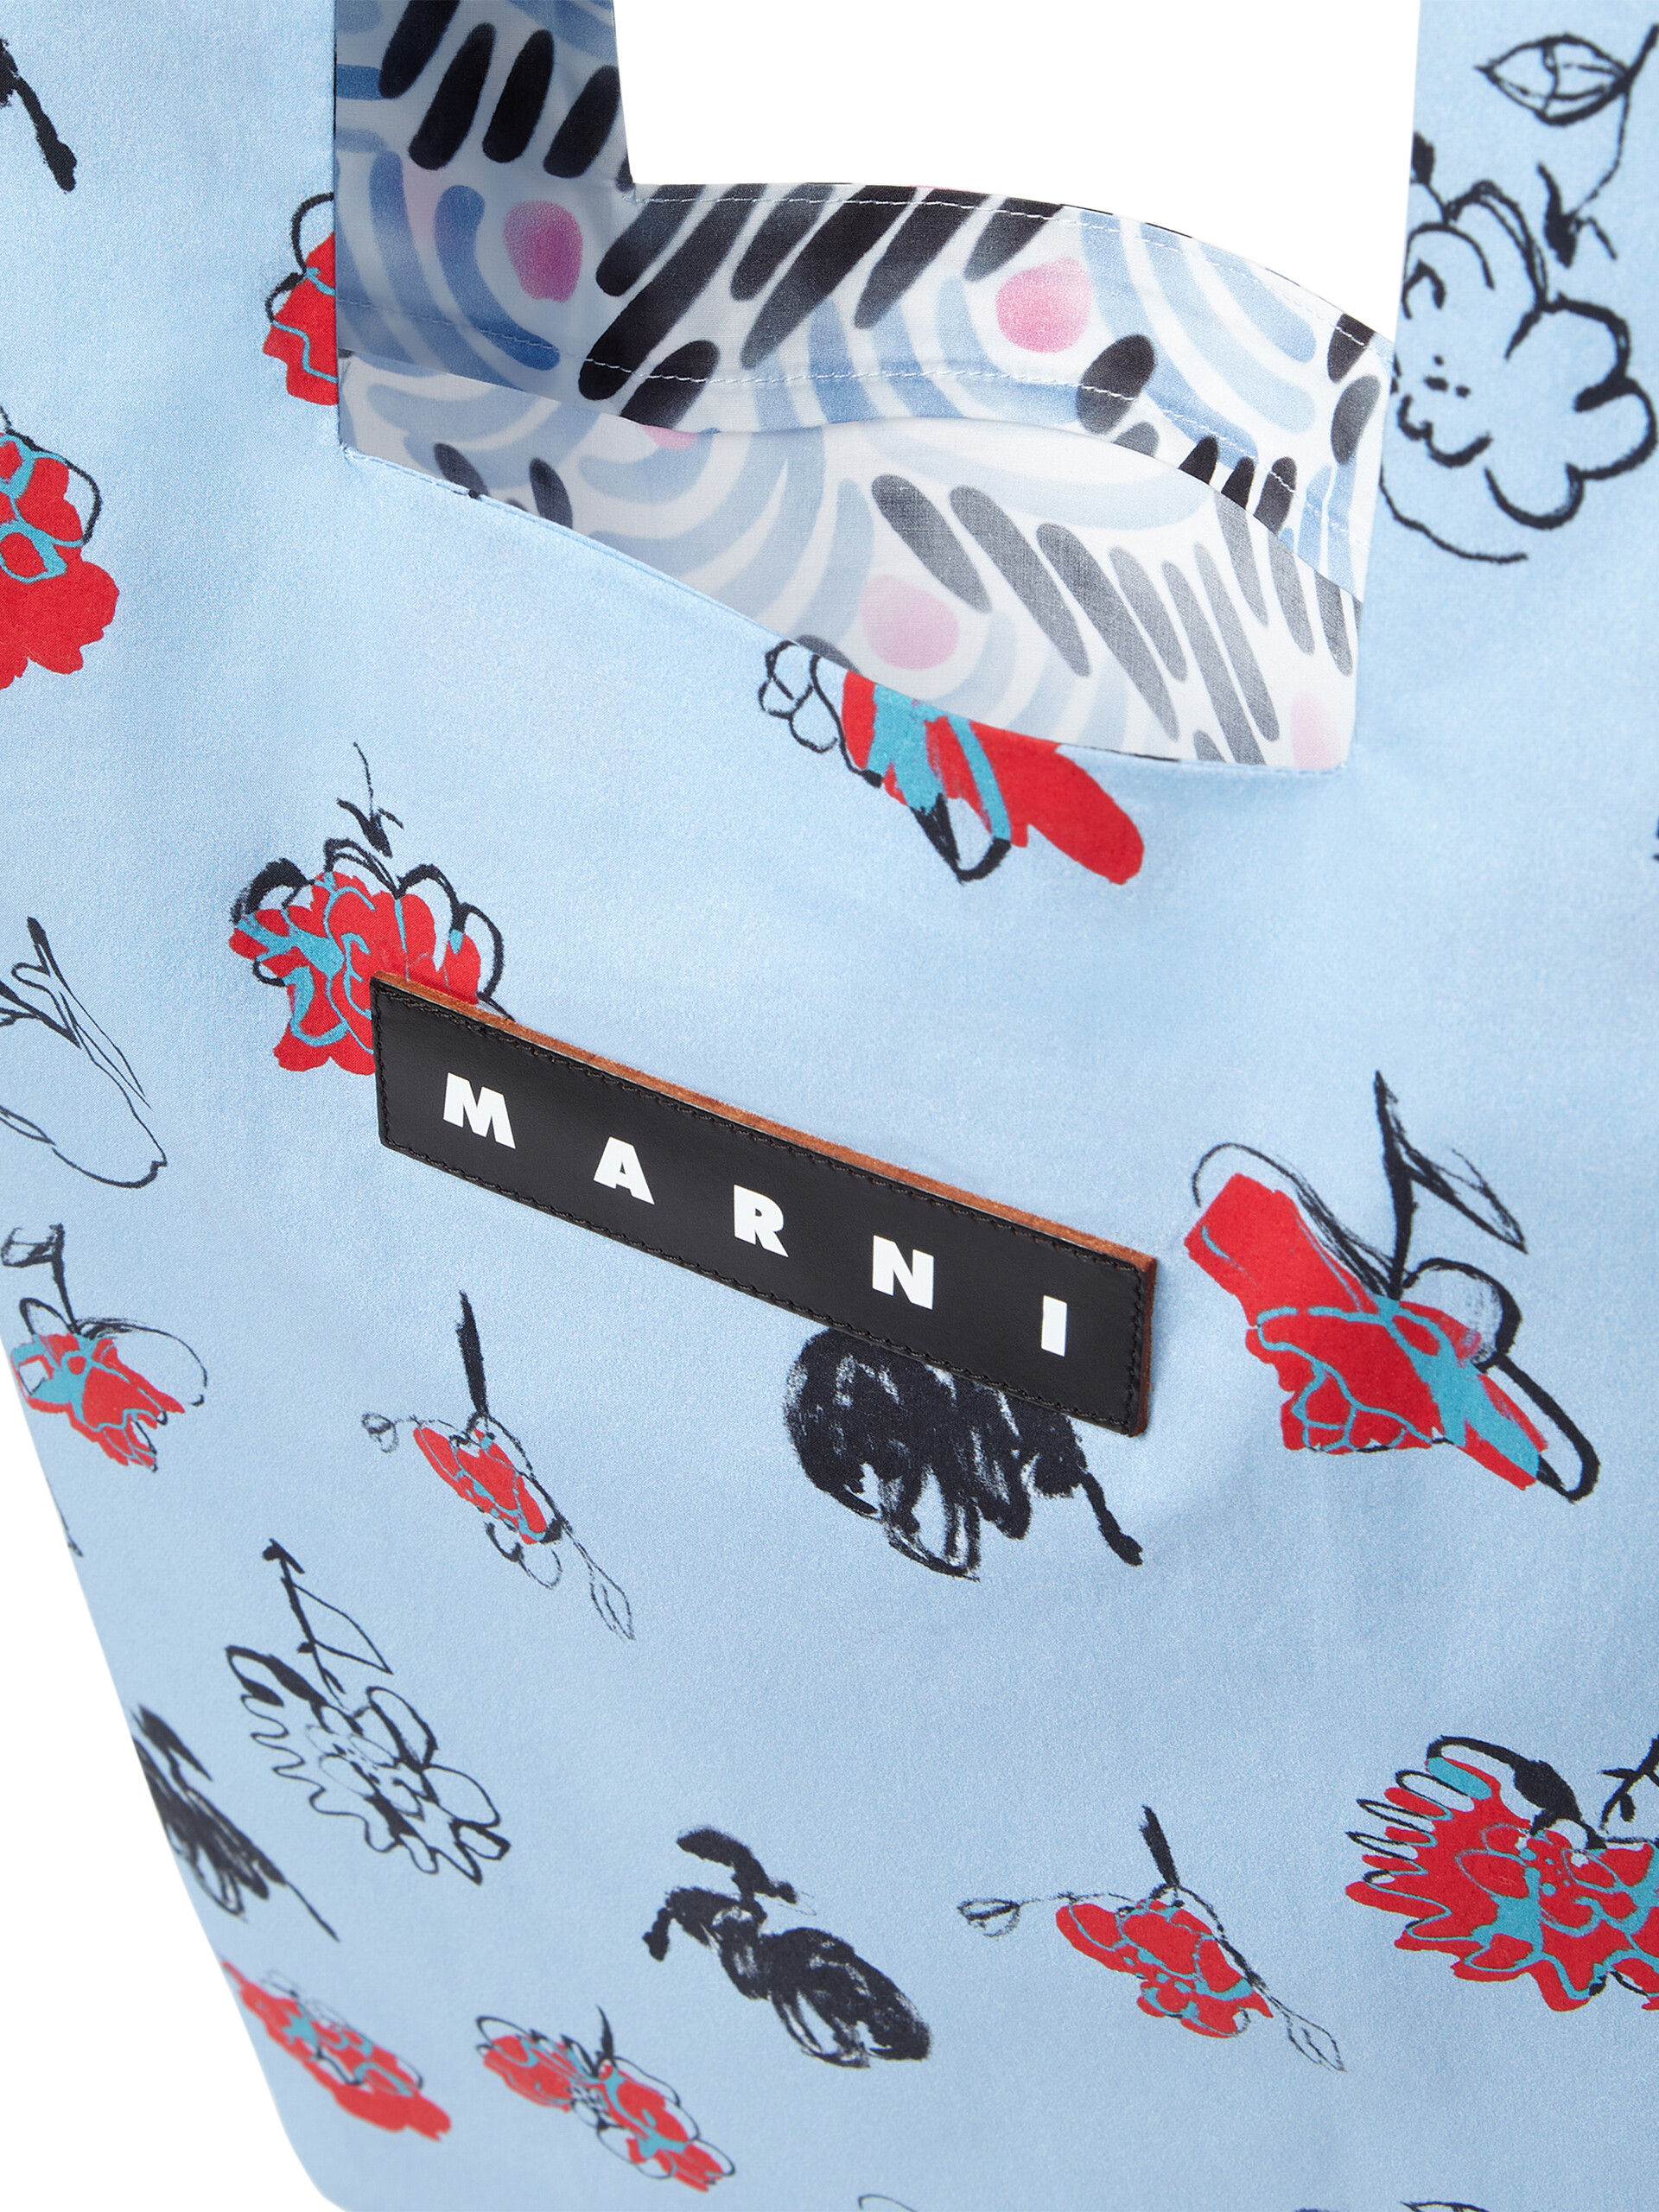 MARNI MARKET cotton shopping bag with floral and abstract print - Shopping Bags - Image 4